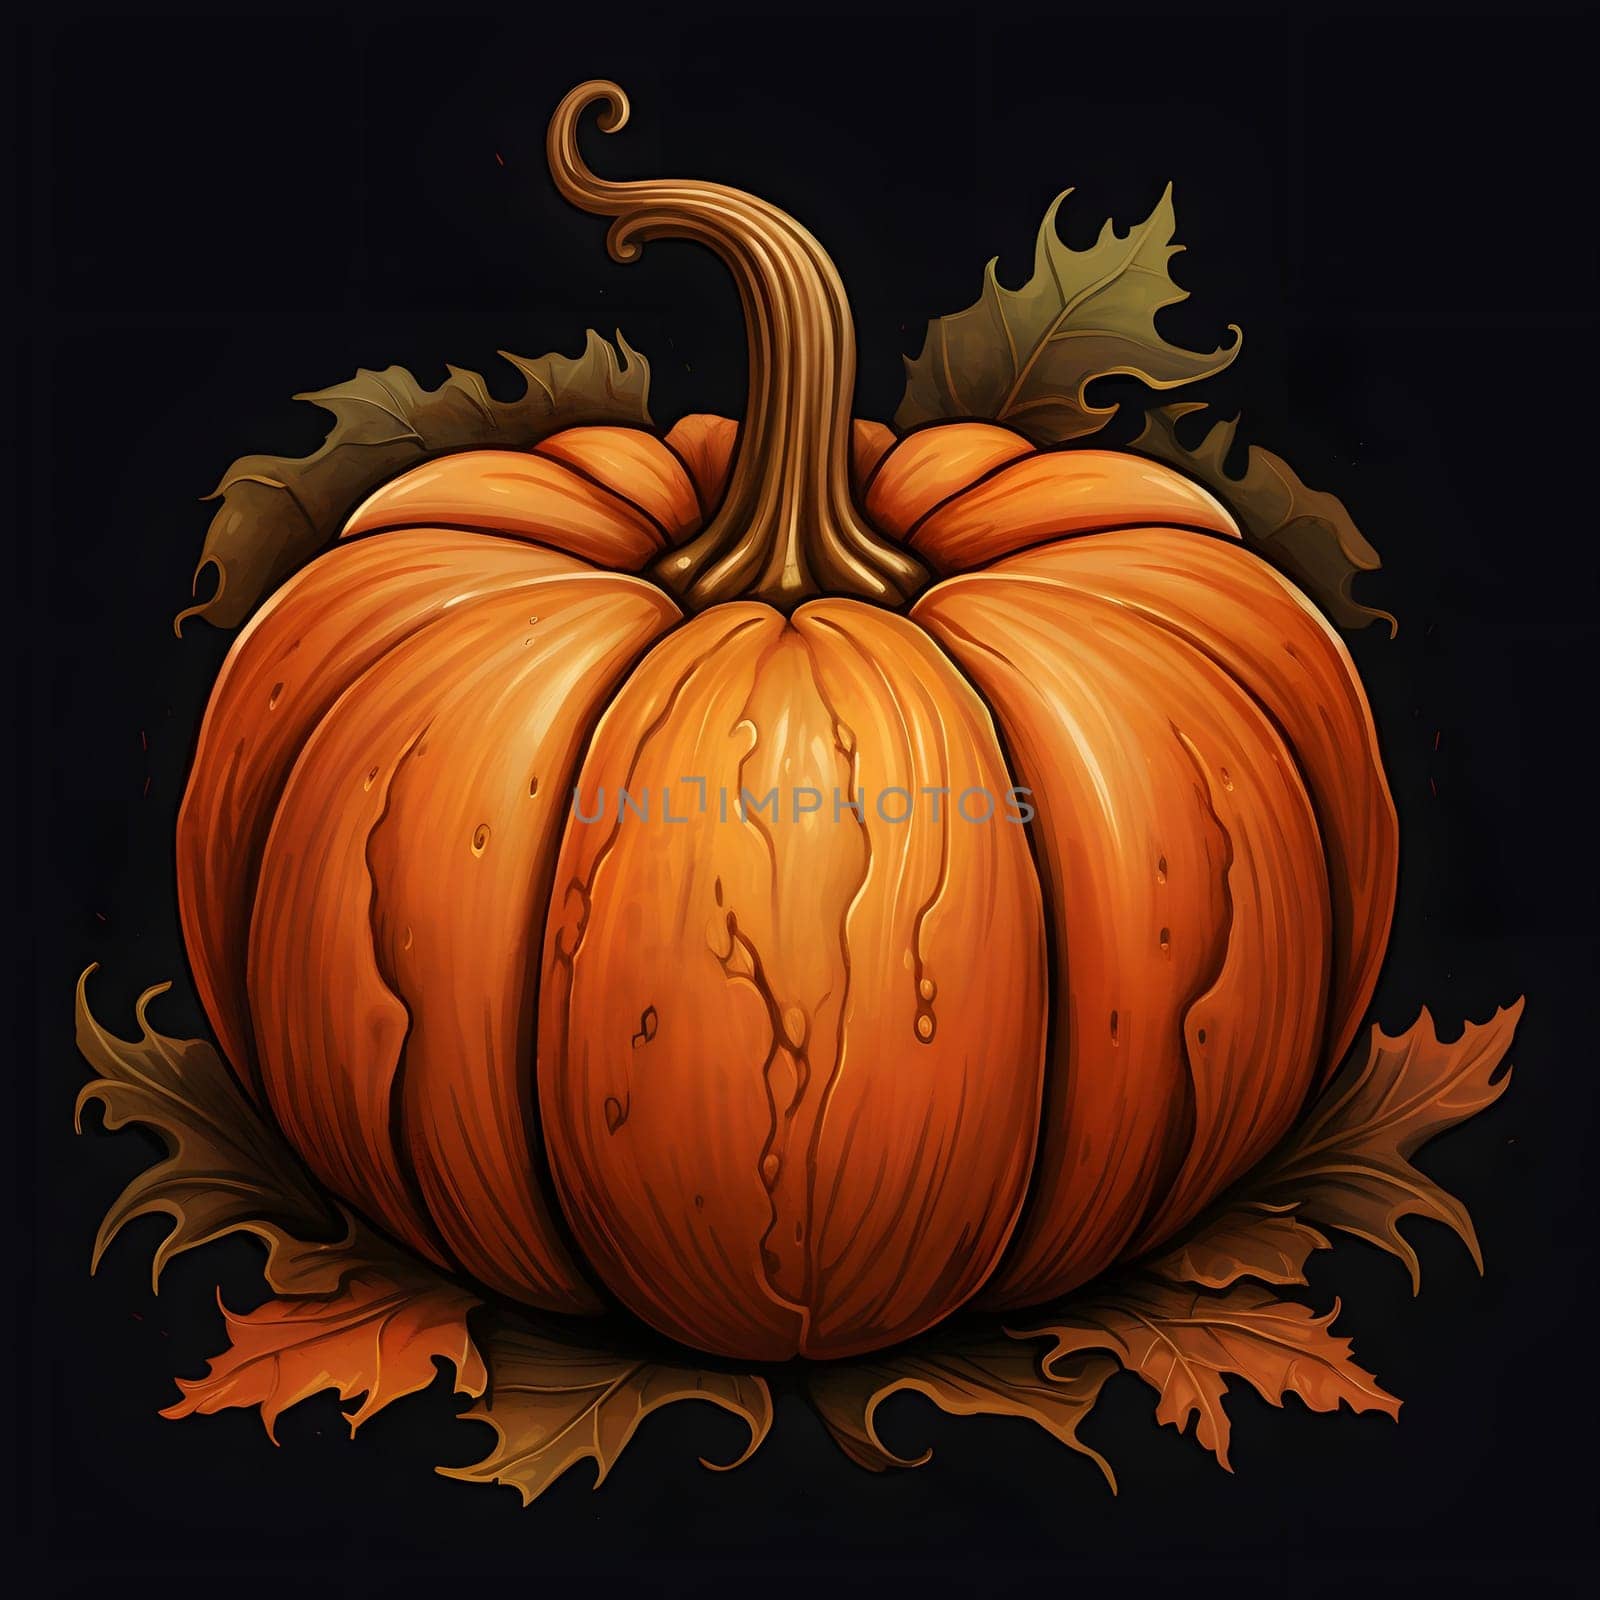 Elegant illustrated pumpkin on black background. Pumpkin as a dish of thanksgiving for the harvest. An atmosphere of joy and celebration.